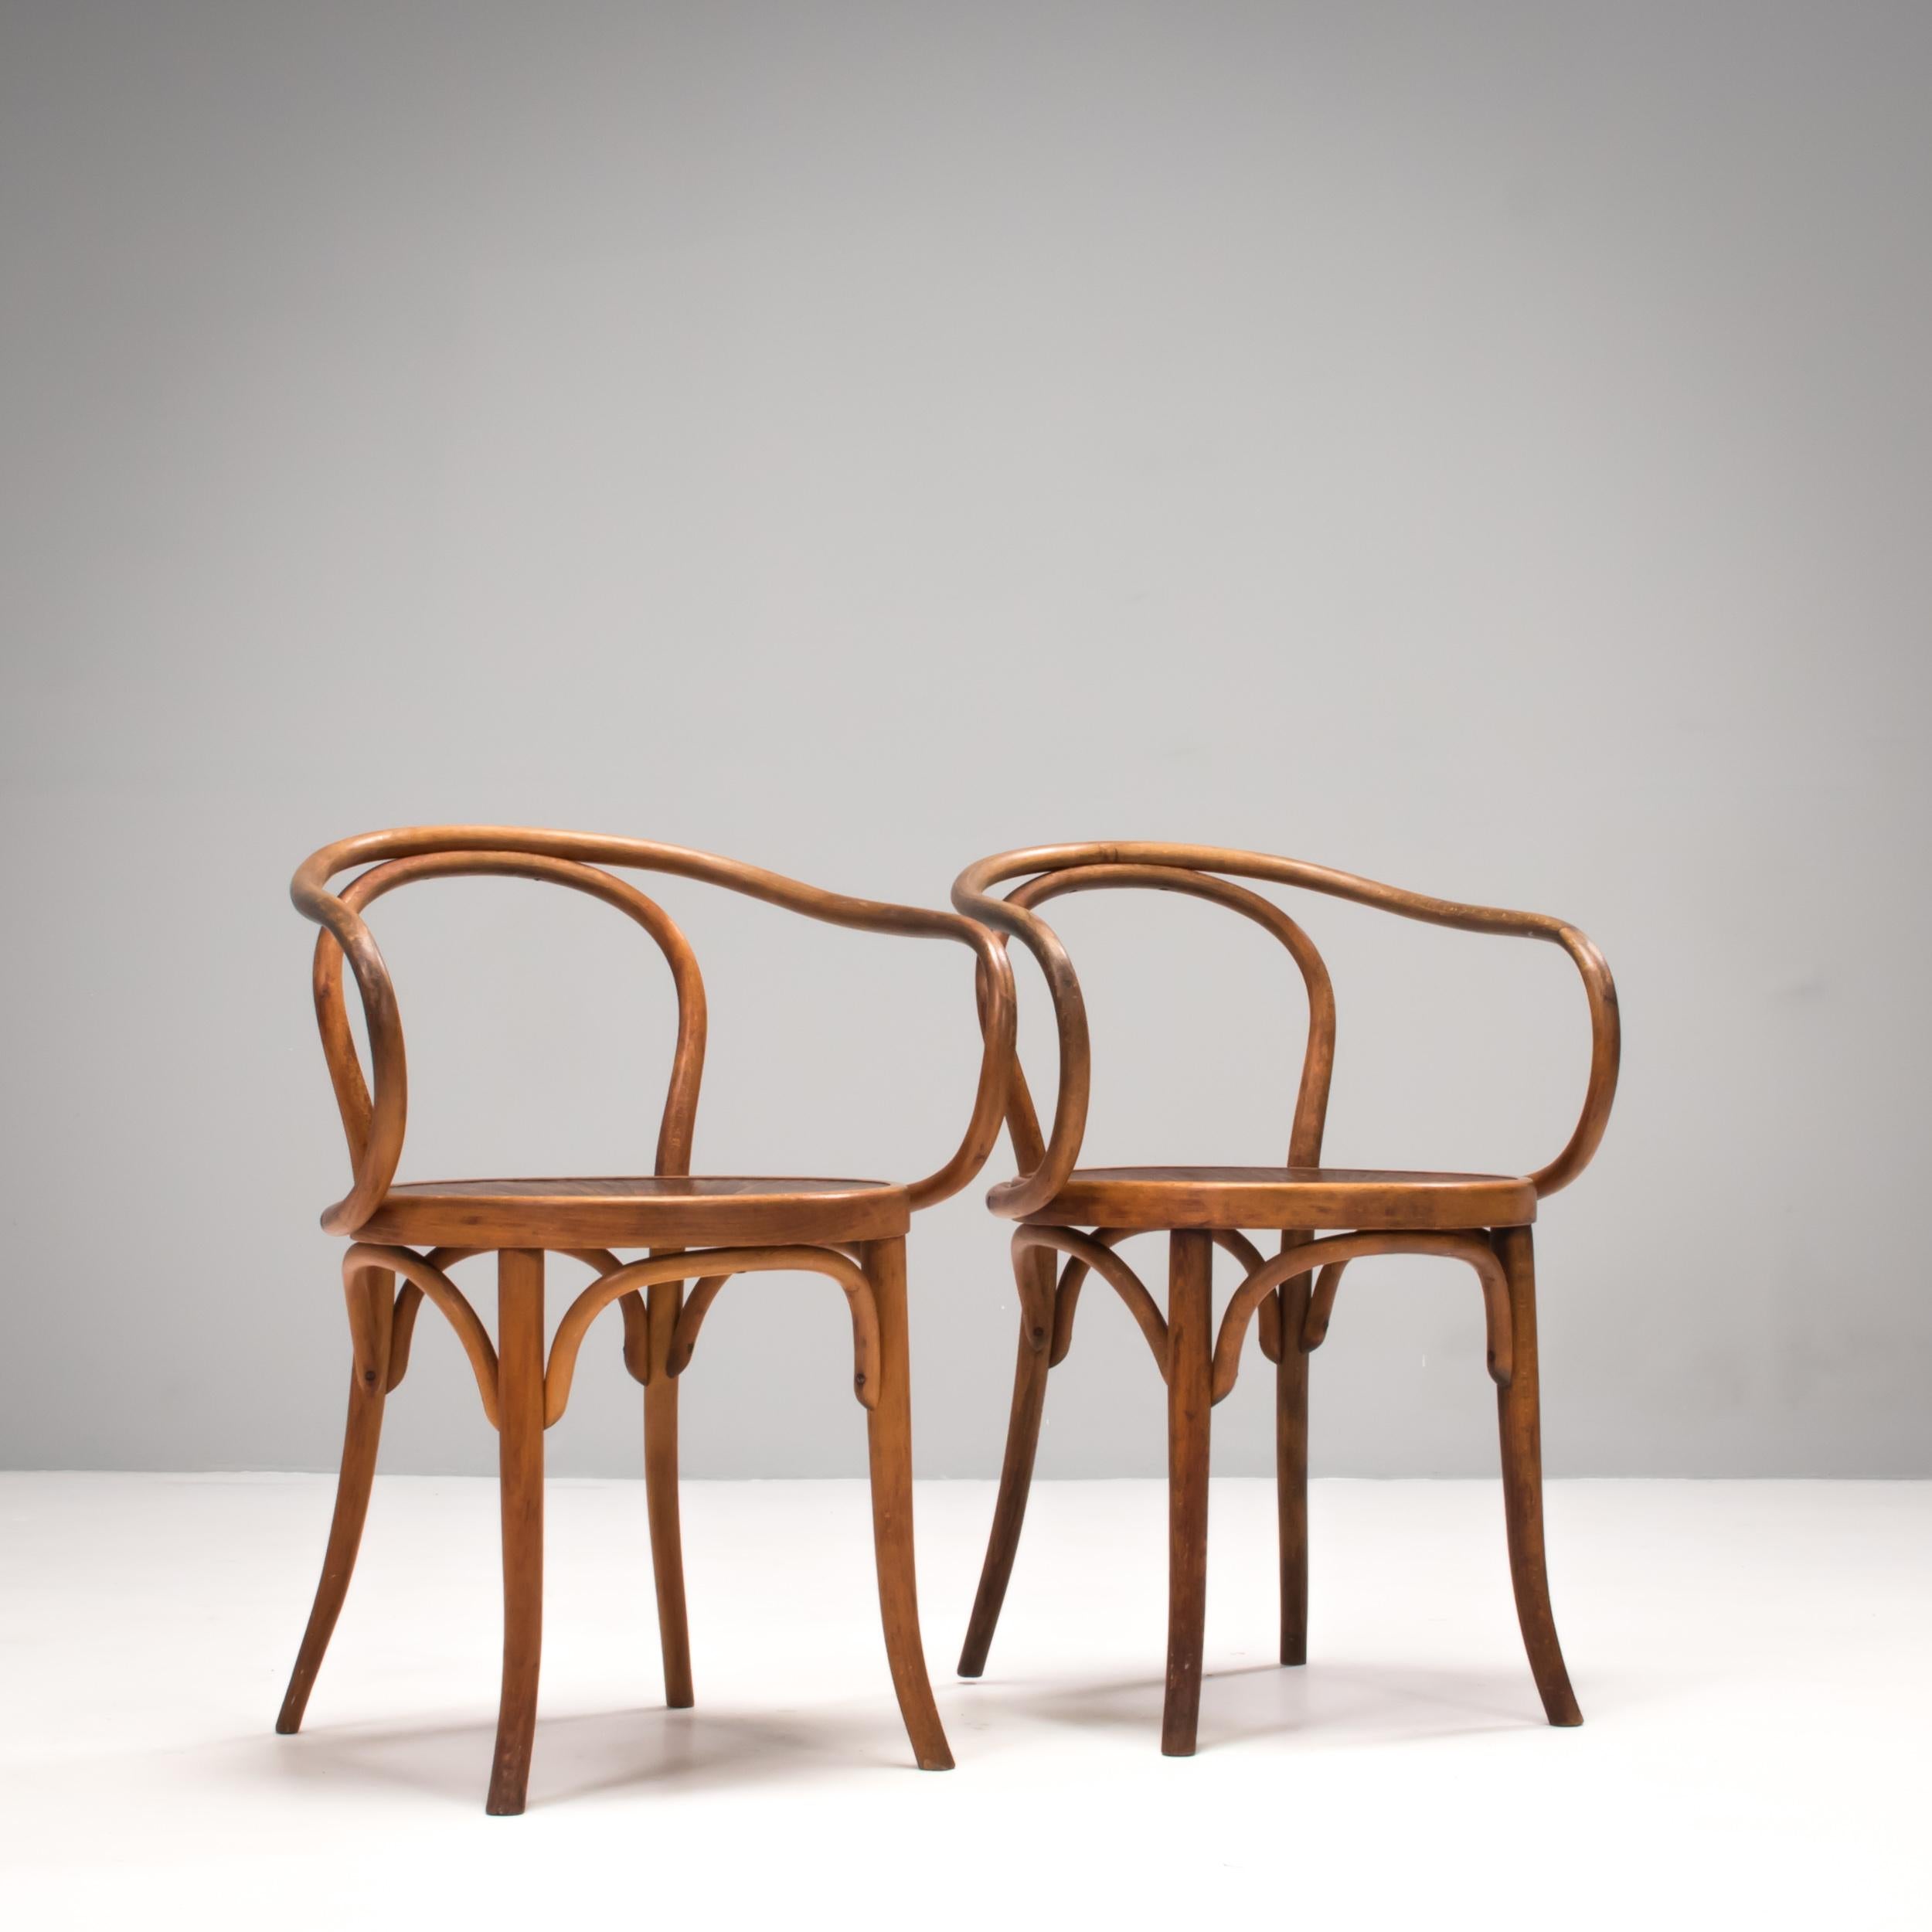 Similar in style to the iconic B9 model that was used throughout Le Corbusier’s designs in the 1920s, these Thonet bentwood chairs are a true design classic.

Featuring the signature bentwood to create the backrest and arms, the chairs also have